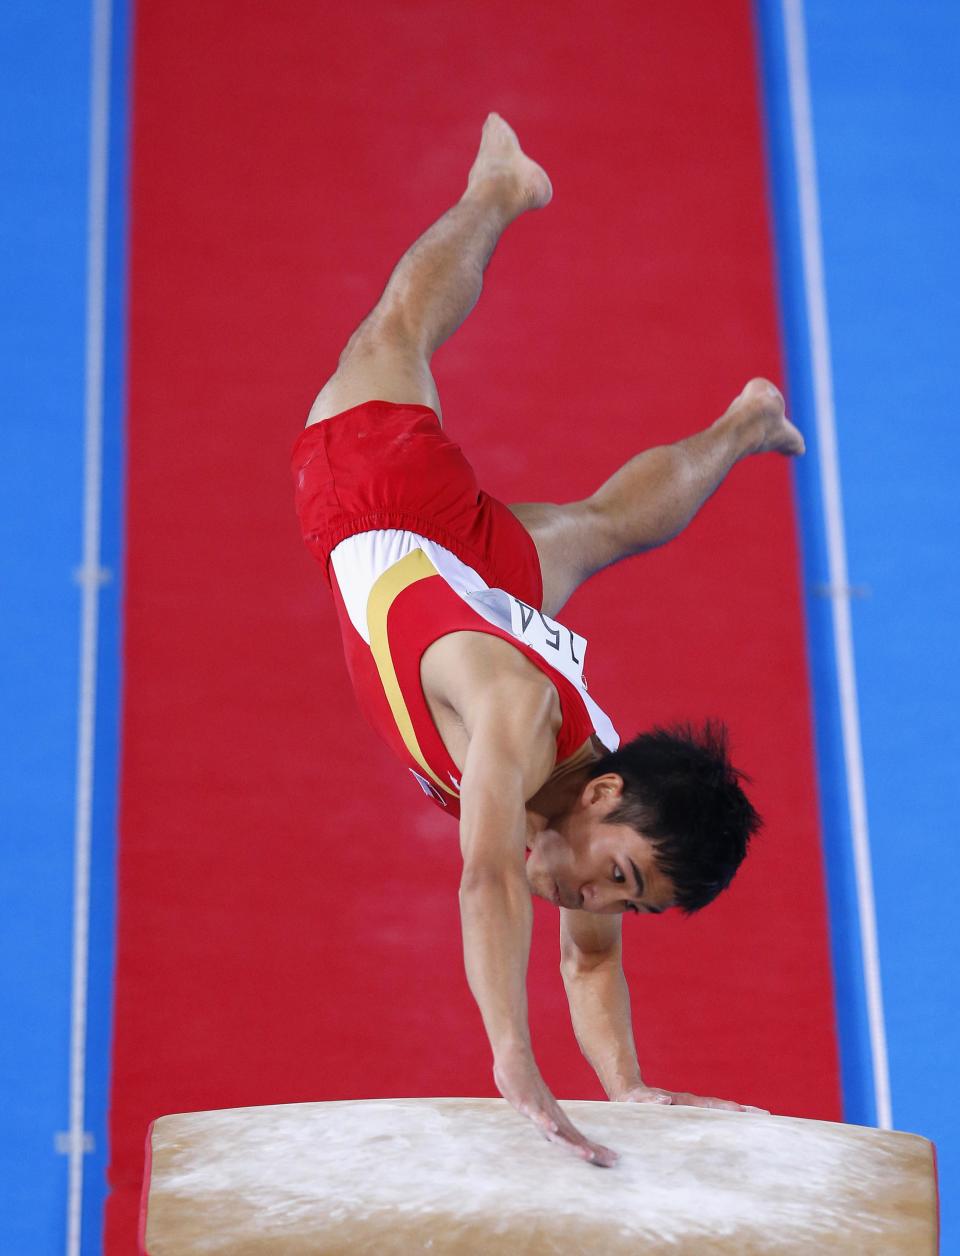 Hoe performs a vault during the gymnastics apparatus final at the Commonwealth REUTERS/Phil Noble